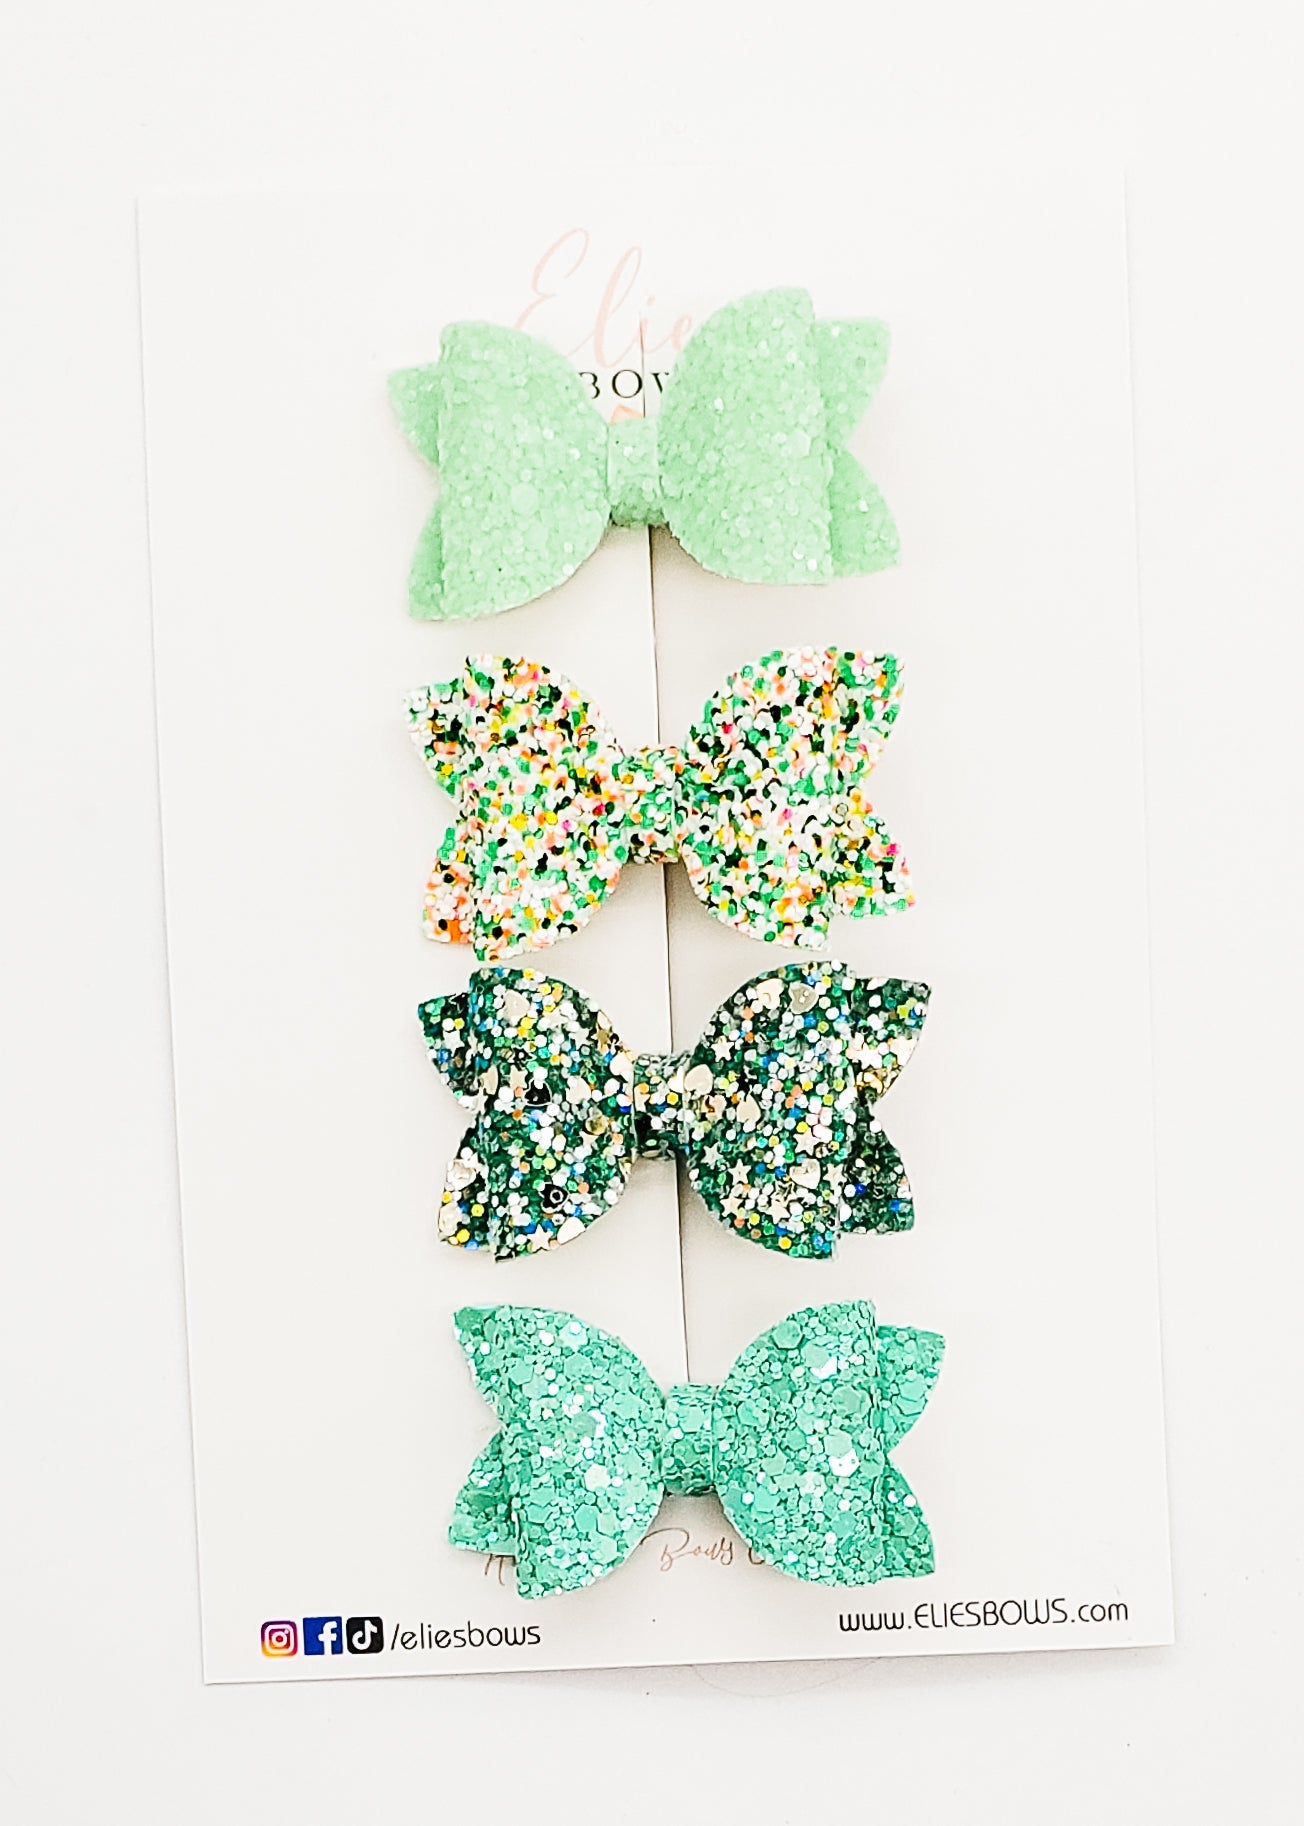 Green Glitter Bows - 2"-Bows-Elie’s Bows